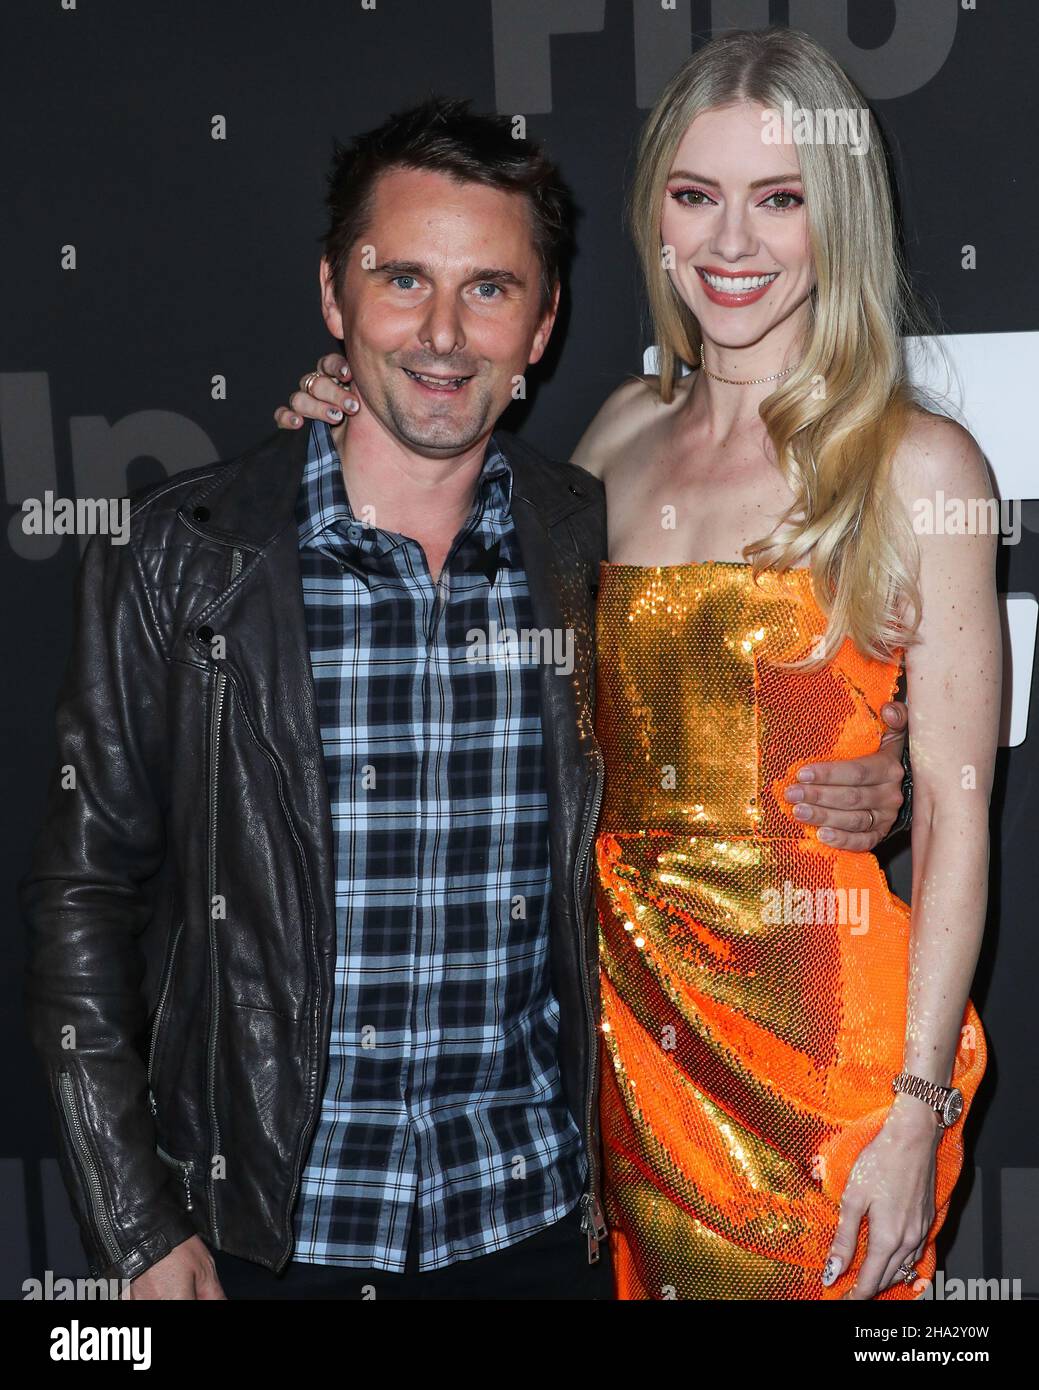 HOLLYWOOD, LOS ANGELES, CALIFORNIA, USA - DECEMBER 09: Singer Matt Bellamy and wife/model Elle Evans Bellamy arrive at the Flip Grand Launch Event Hosted by Grammy-Nominated Artist Halsey with Performances by Scout Willis, BIA, and Kehlani held at Avalon Hollywood on December 9, 2021 in Hollywood, Los Angeles, California, United States. (Photo by Xavier Collin/Image Press Agency) Stock Photo